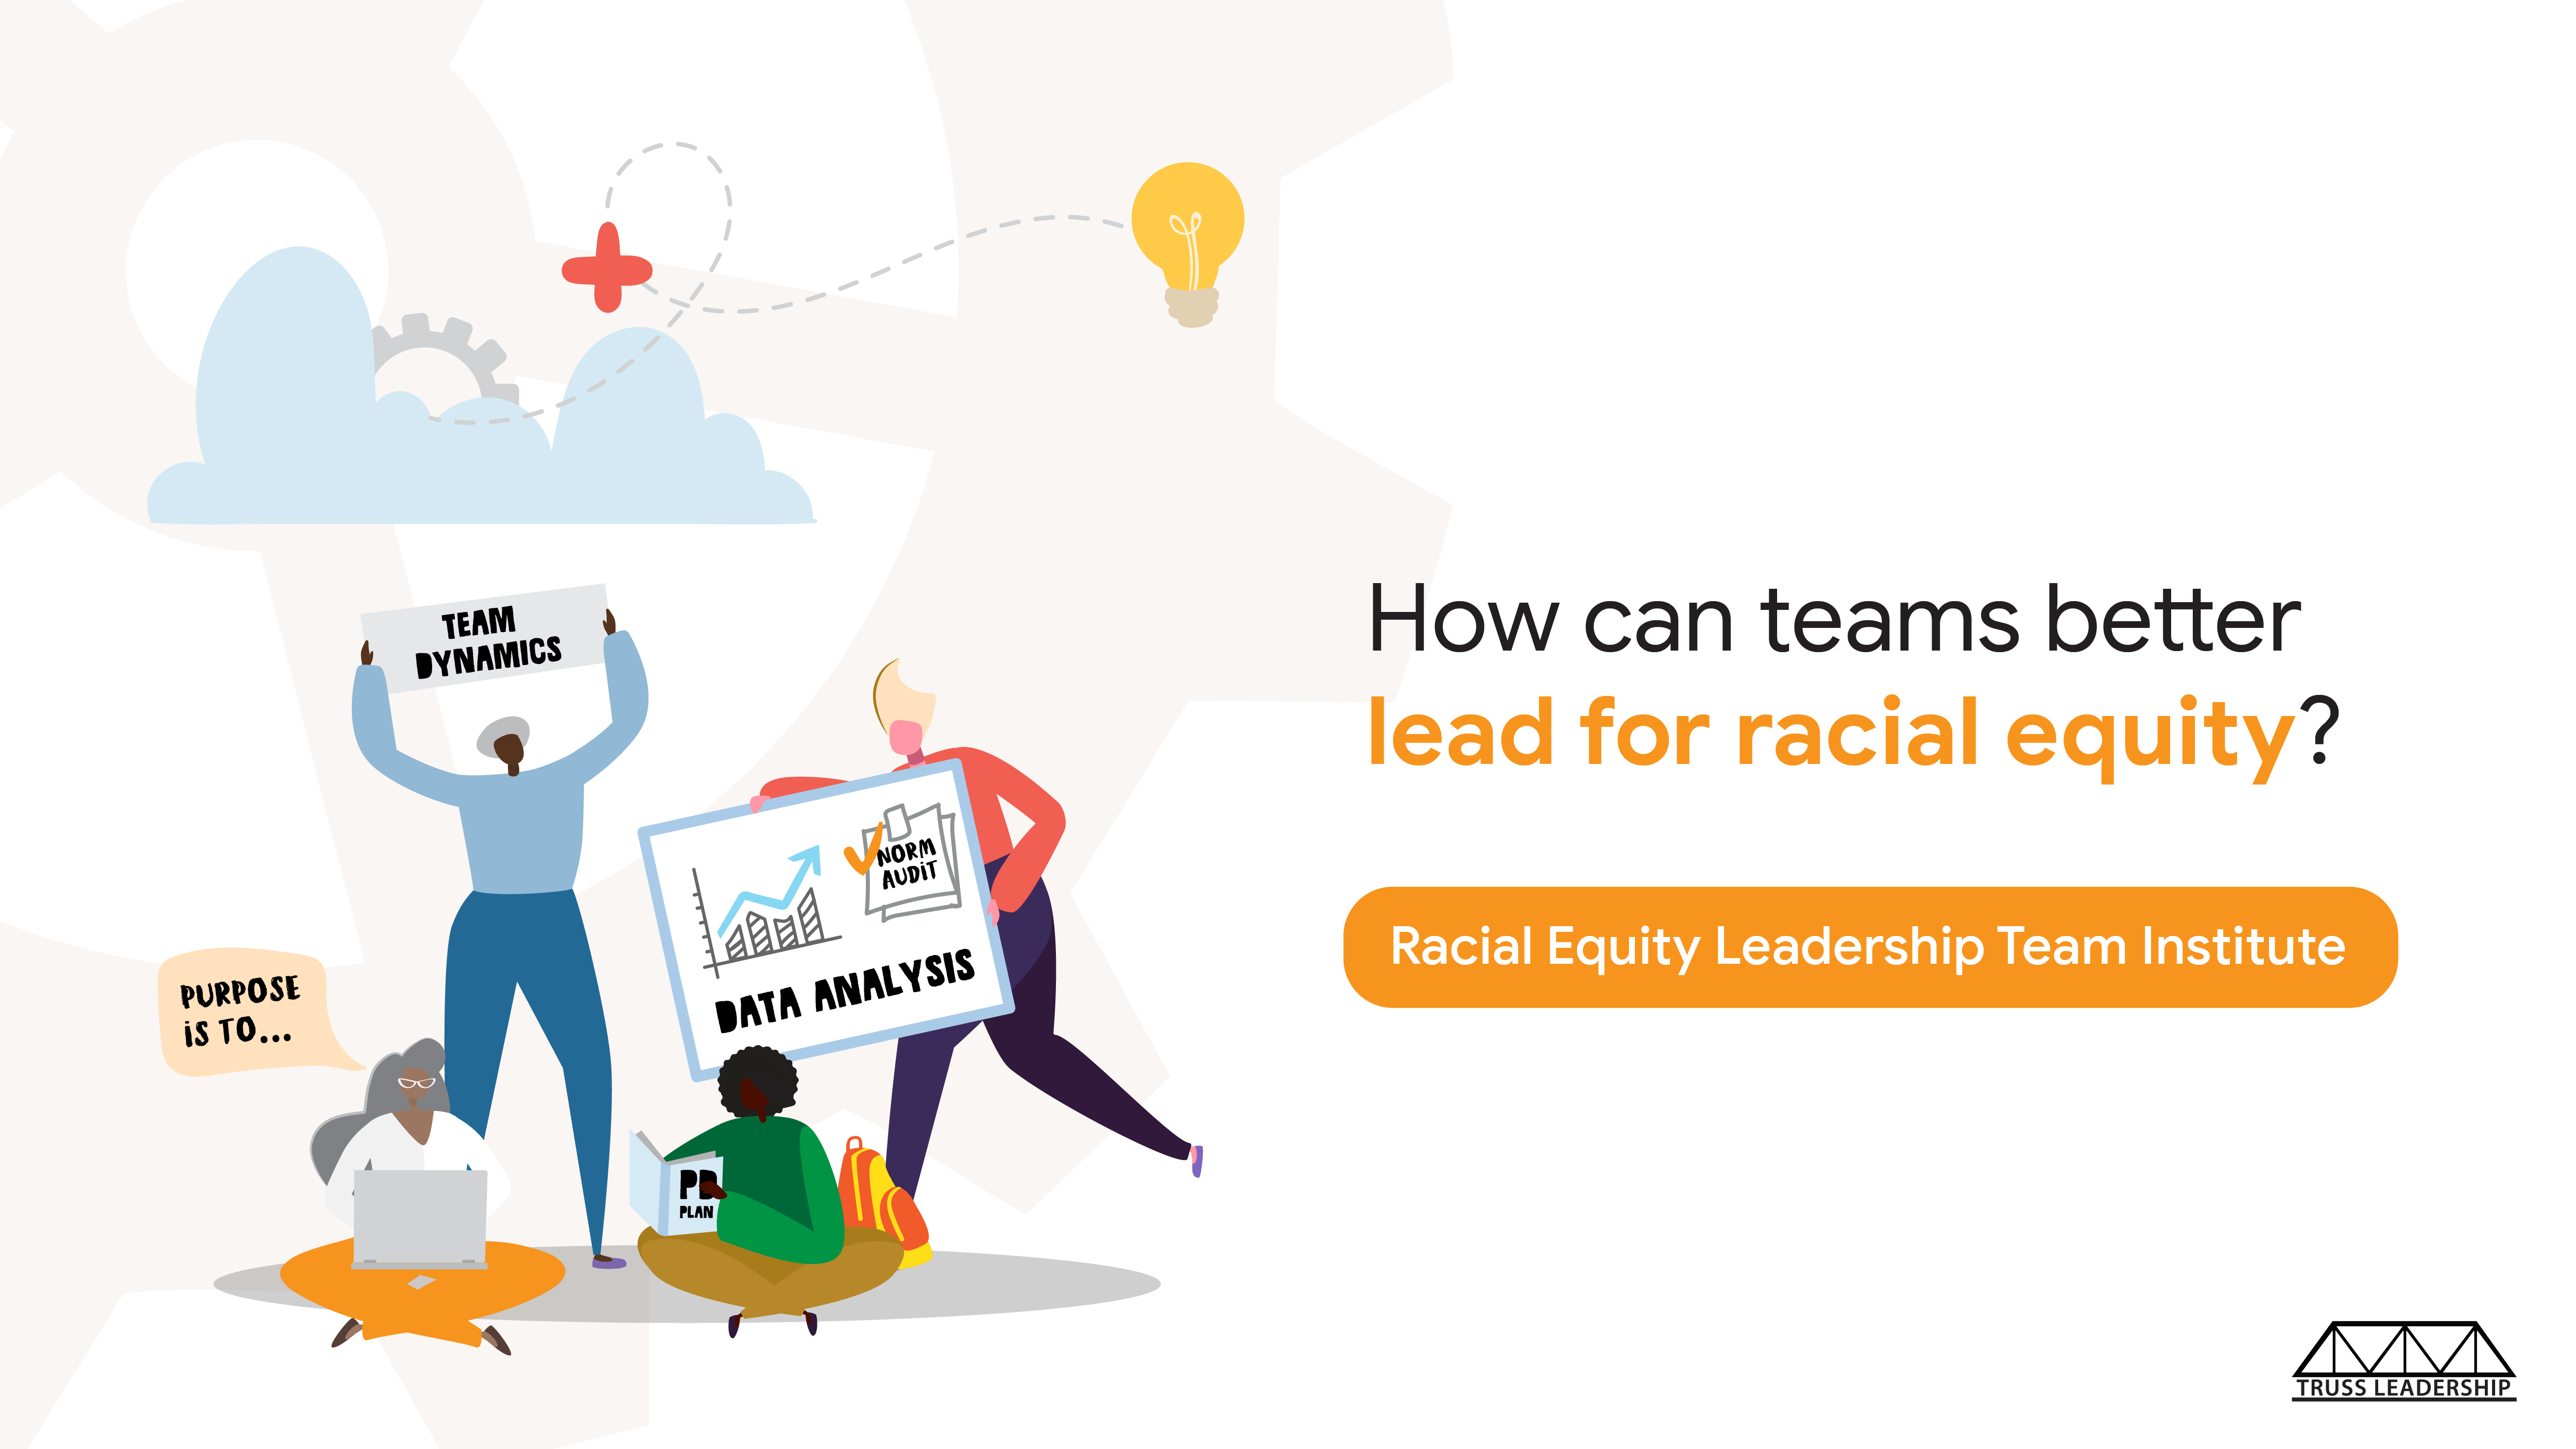 There are two people standing and one sitting all facing forward with a cloud and light bulb above them. There is an orange button with the text button that says Racial Equity Leadership. This graphic supports the racial equity year-long course.